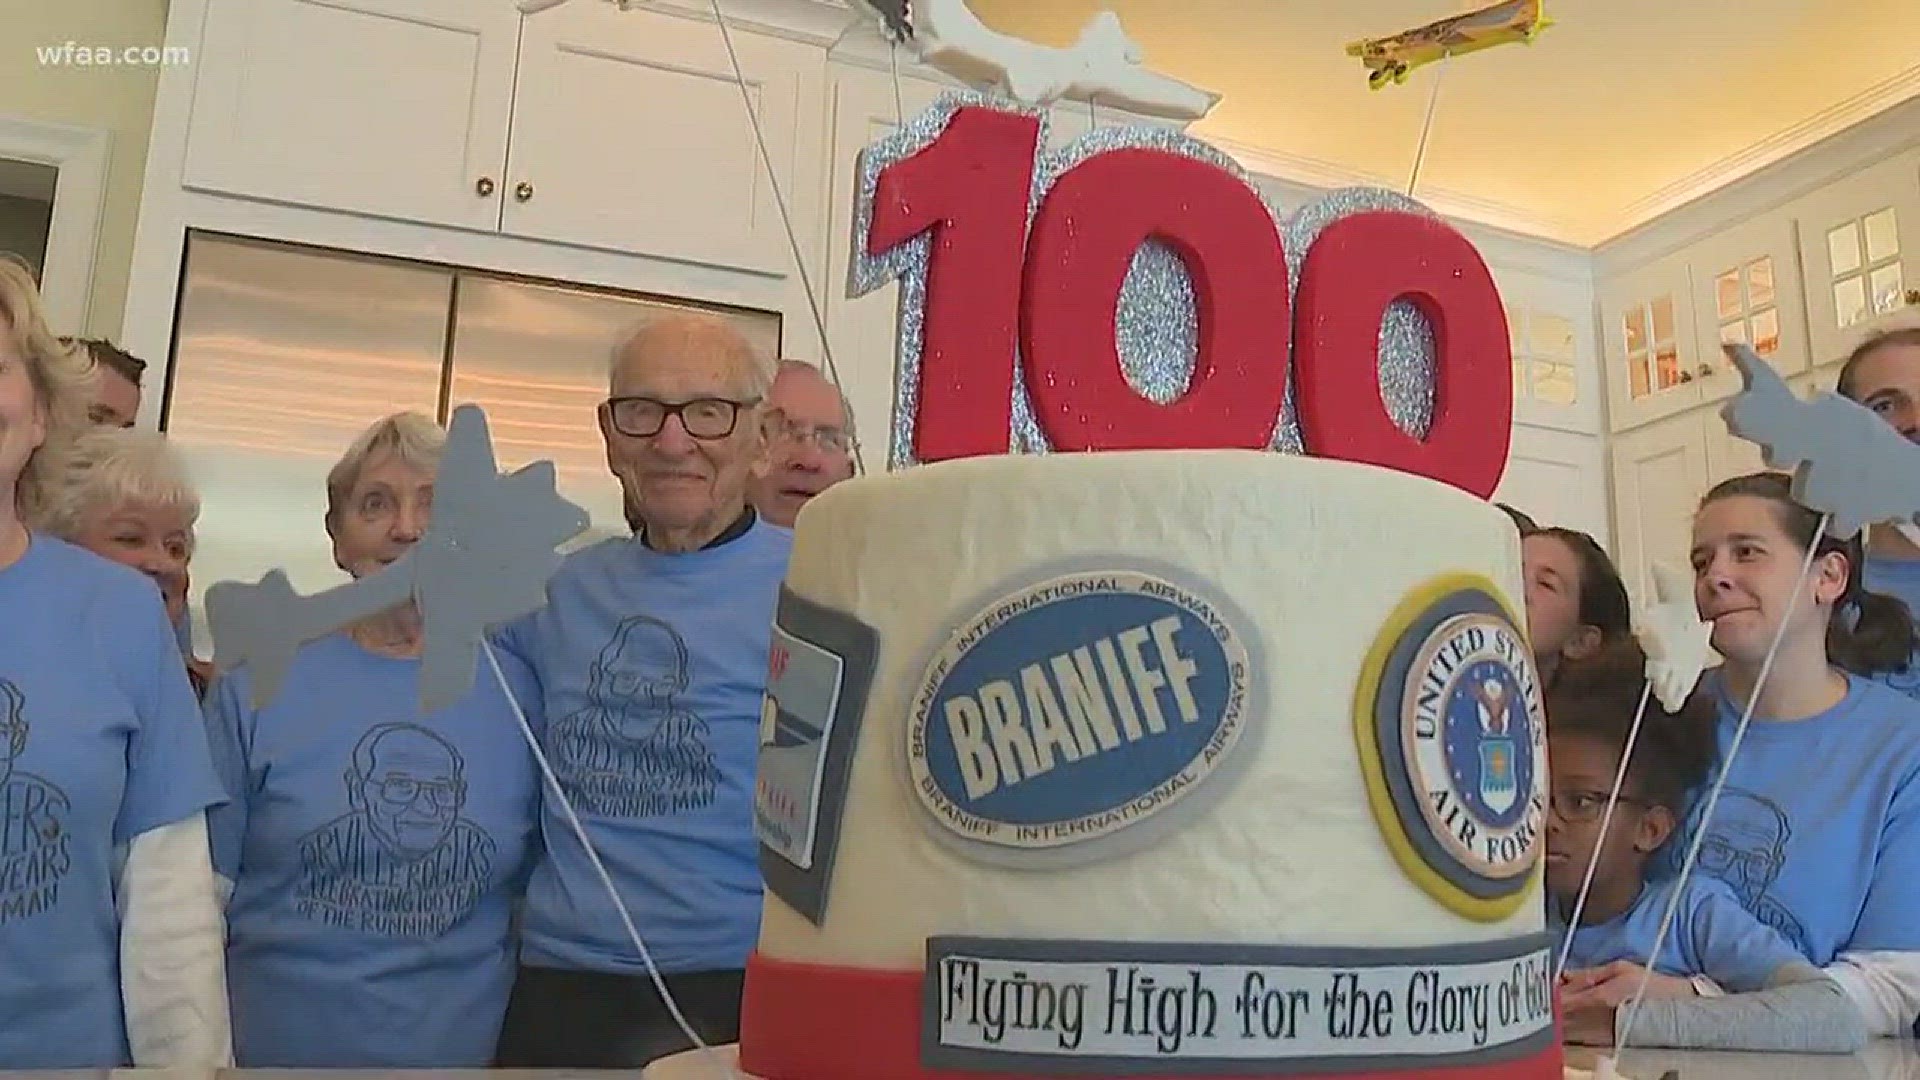 If life is a race, Orville Rogers is enjoying every step of the way. He led a group of family and friends near White Rock Lake Saturday morning, who collectively ran 100 miles to celebrate a major step -- Orville's 100th birthday.